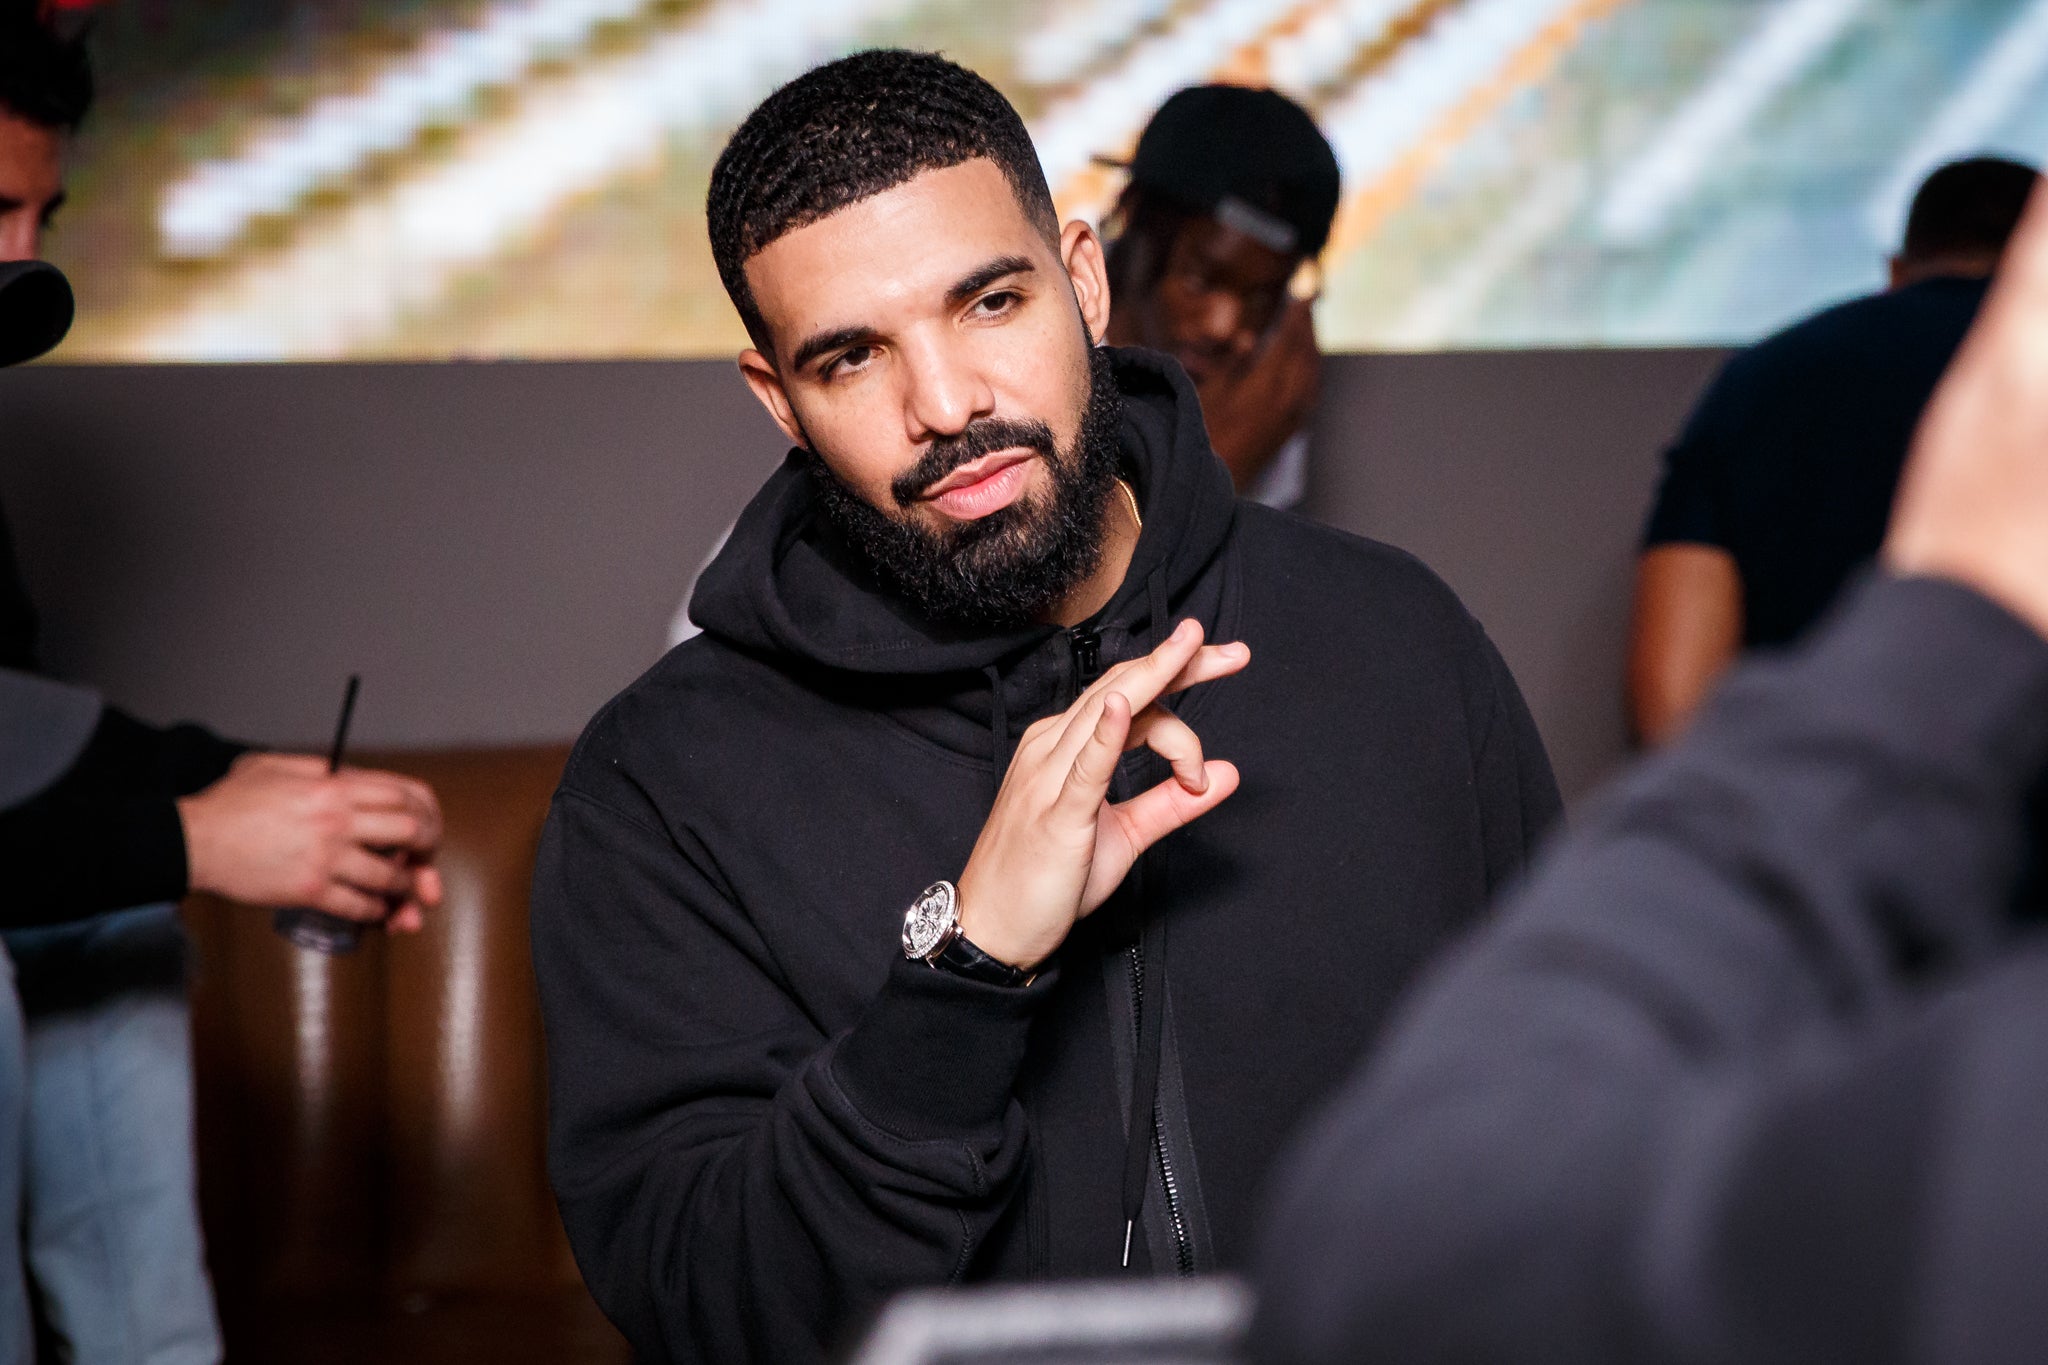 Local athletes joined Drake for a splashy afterparty at a Boston